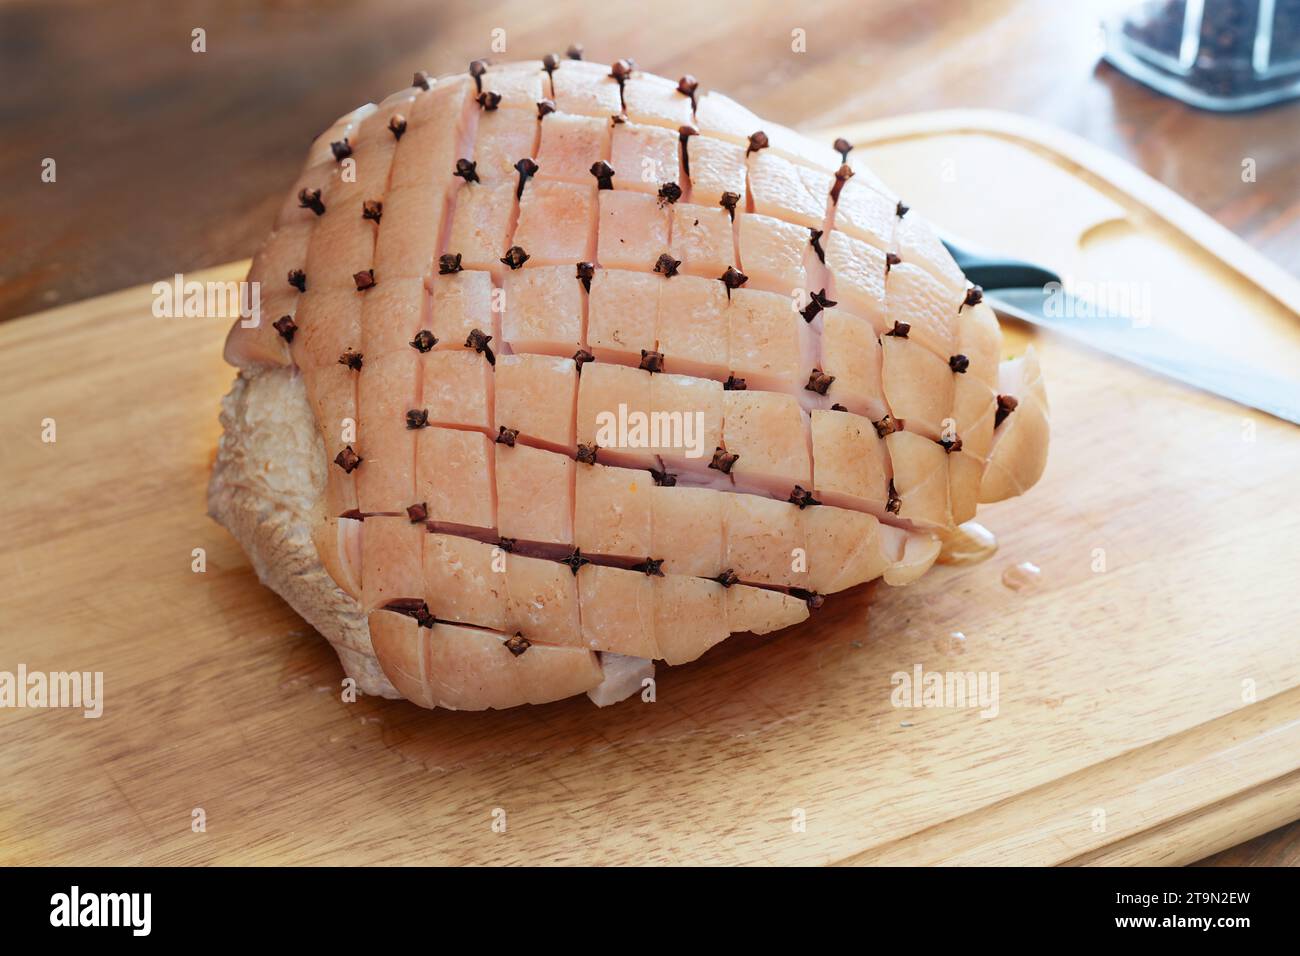 Rind of a raw roast pork cut in diamond shape and larded with cloves on a wooden kitchen board, cooking preparation for a Christmas ham, copy space, s Stock Photo